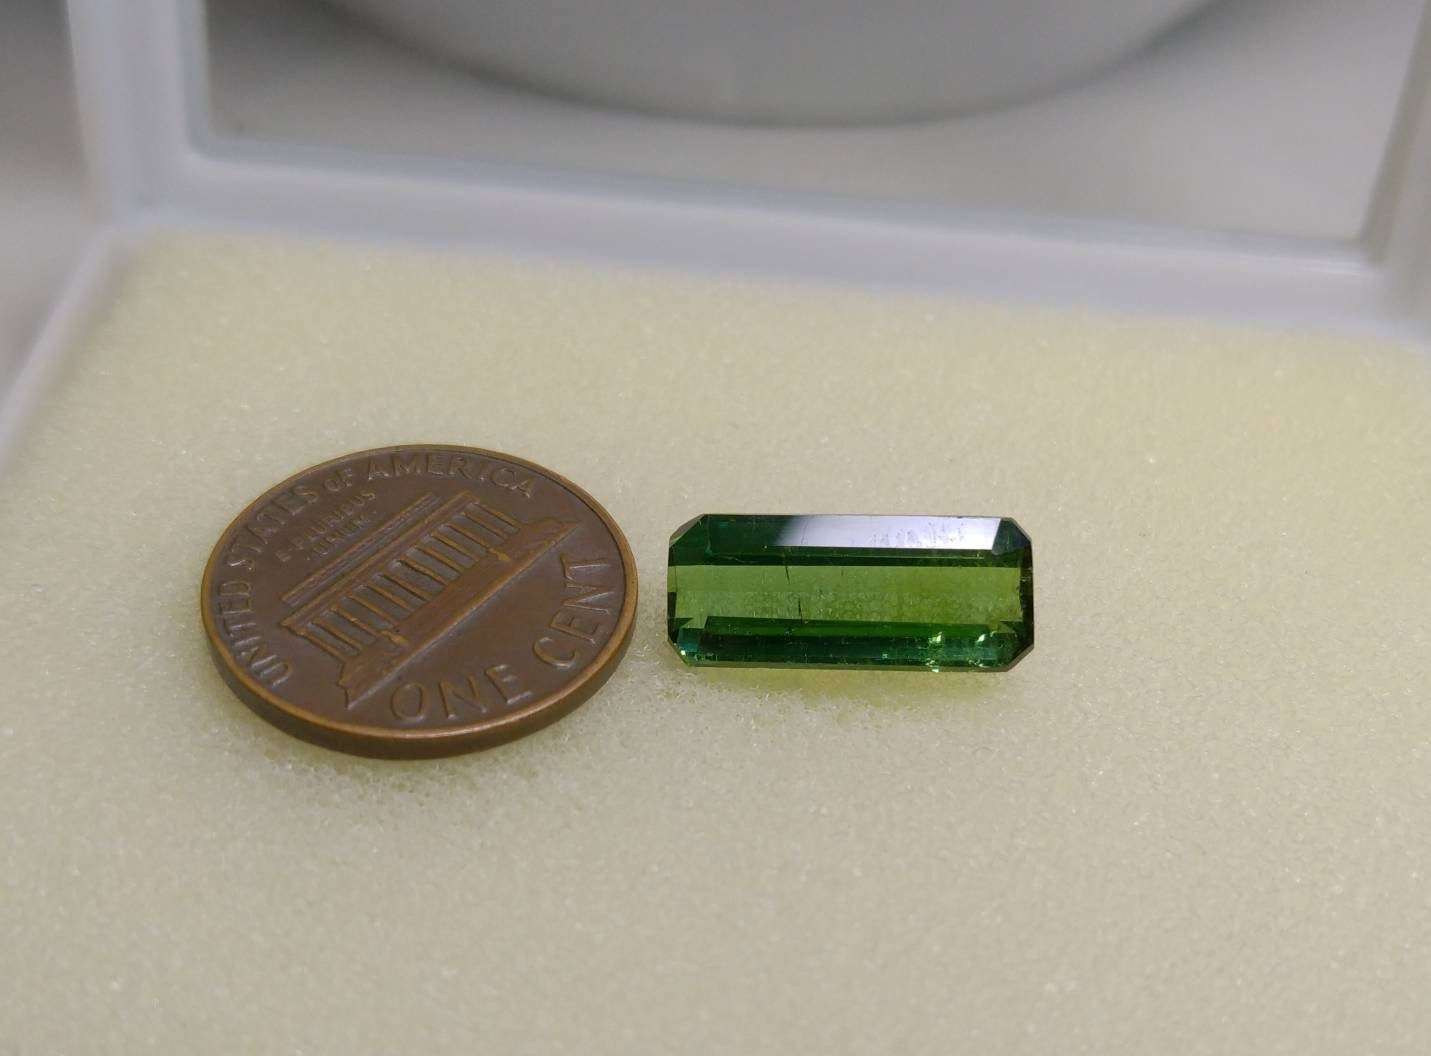 ARSAA GEMS AND MINERALSNatural top quality beautiful 6 carats faceted radiant shape green tourmaline gem - Premium  from ARSAA GEMS AND MINERALS - Just $150.00! Shop now at ARSAA GEMS AND MINERALS